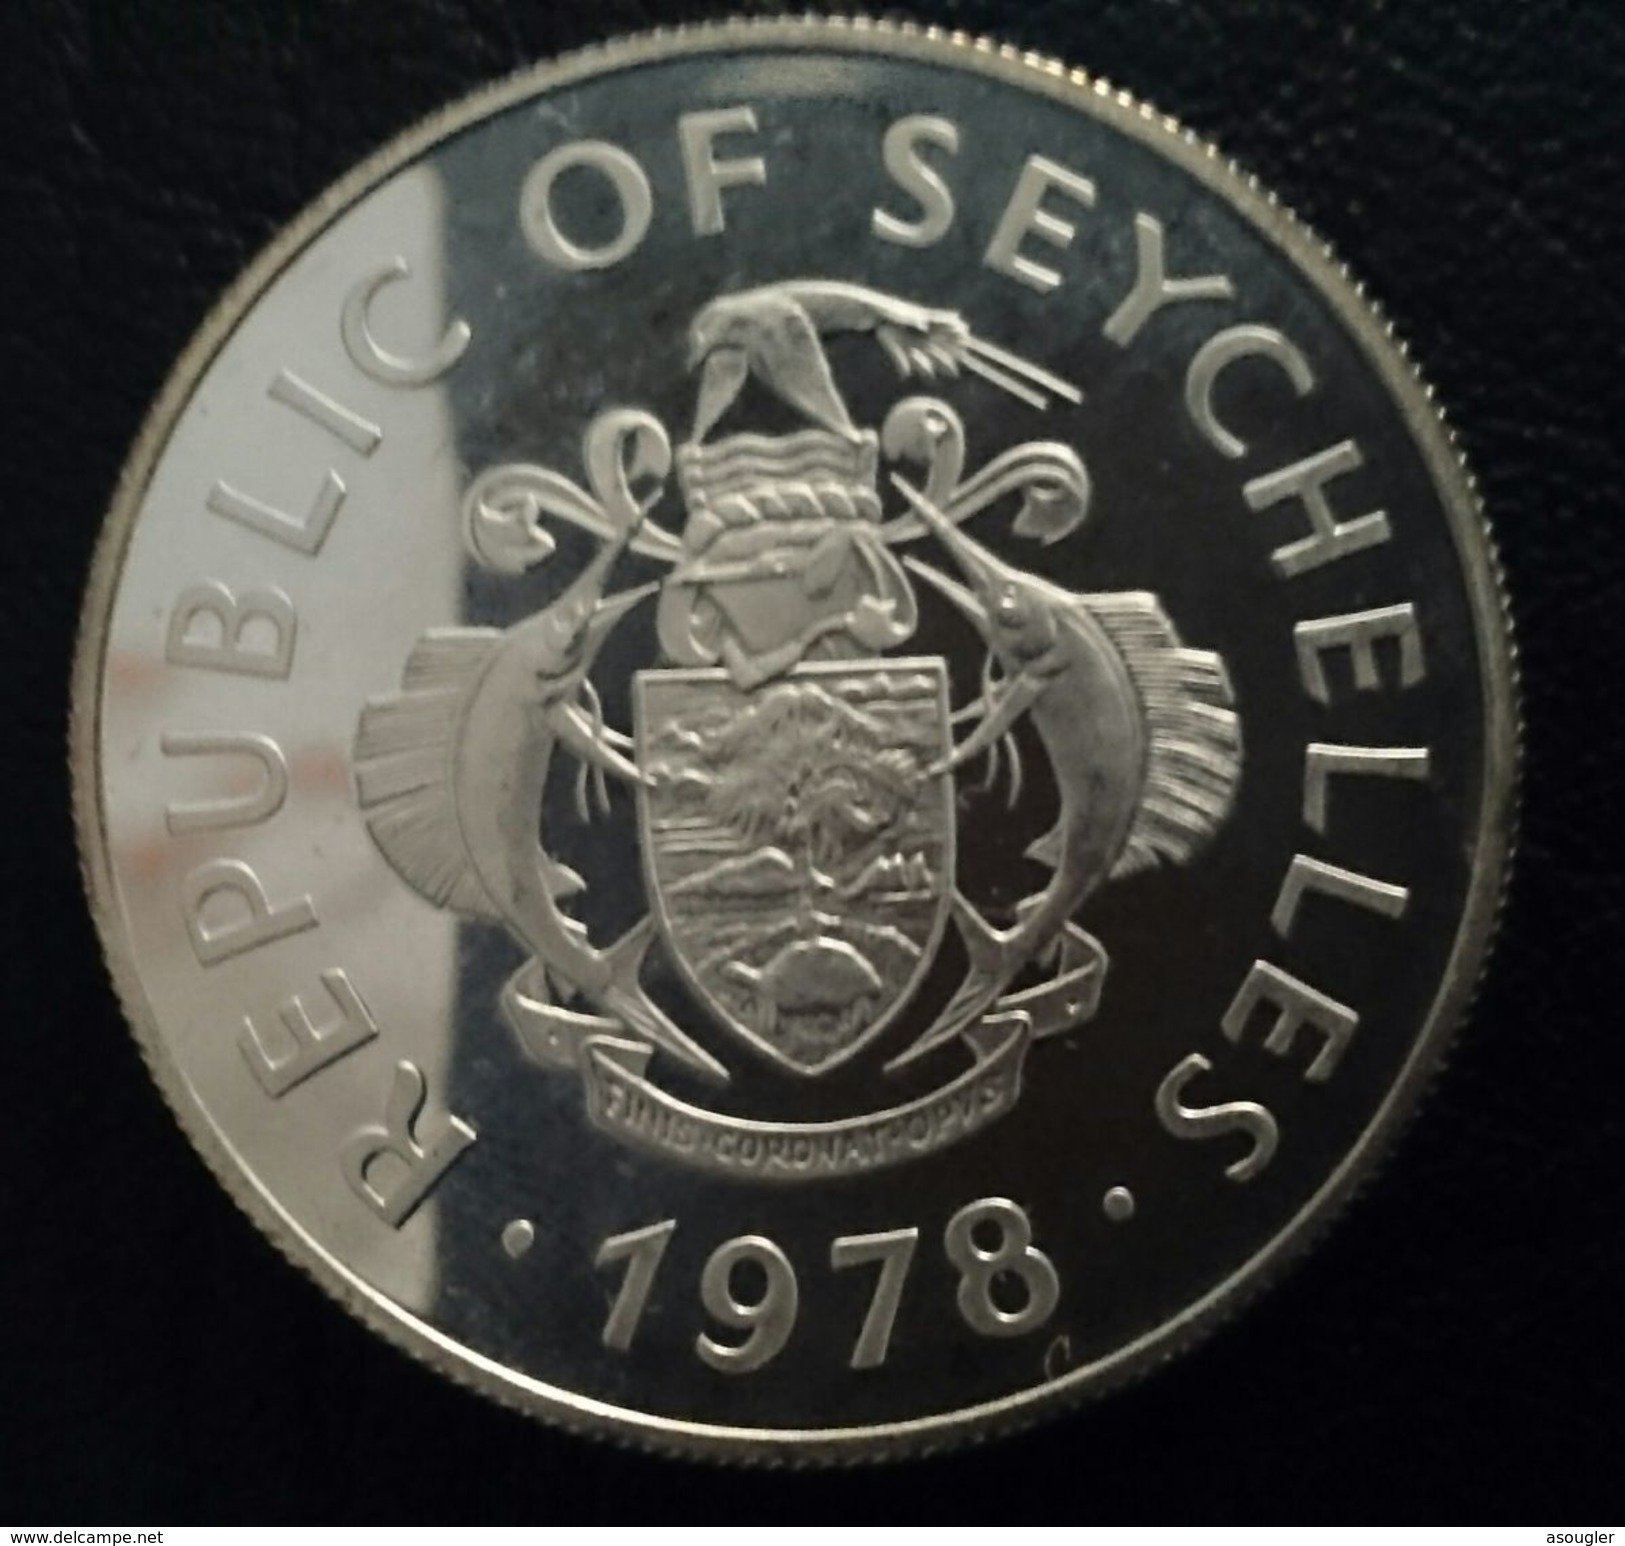 SEYCHELLES 50 RUPEES 1978 SILVER PROOF "Conservation" Free Shipping Via Registered Air Mail - Seychellen